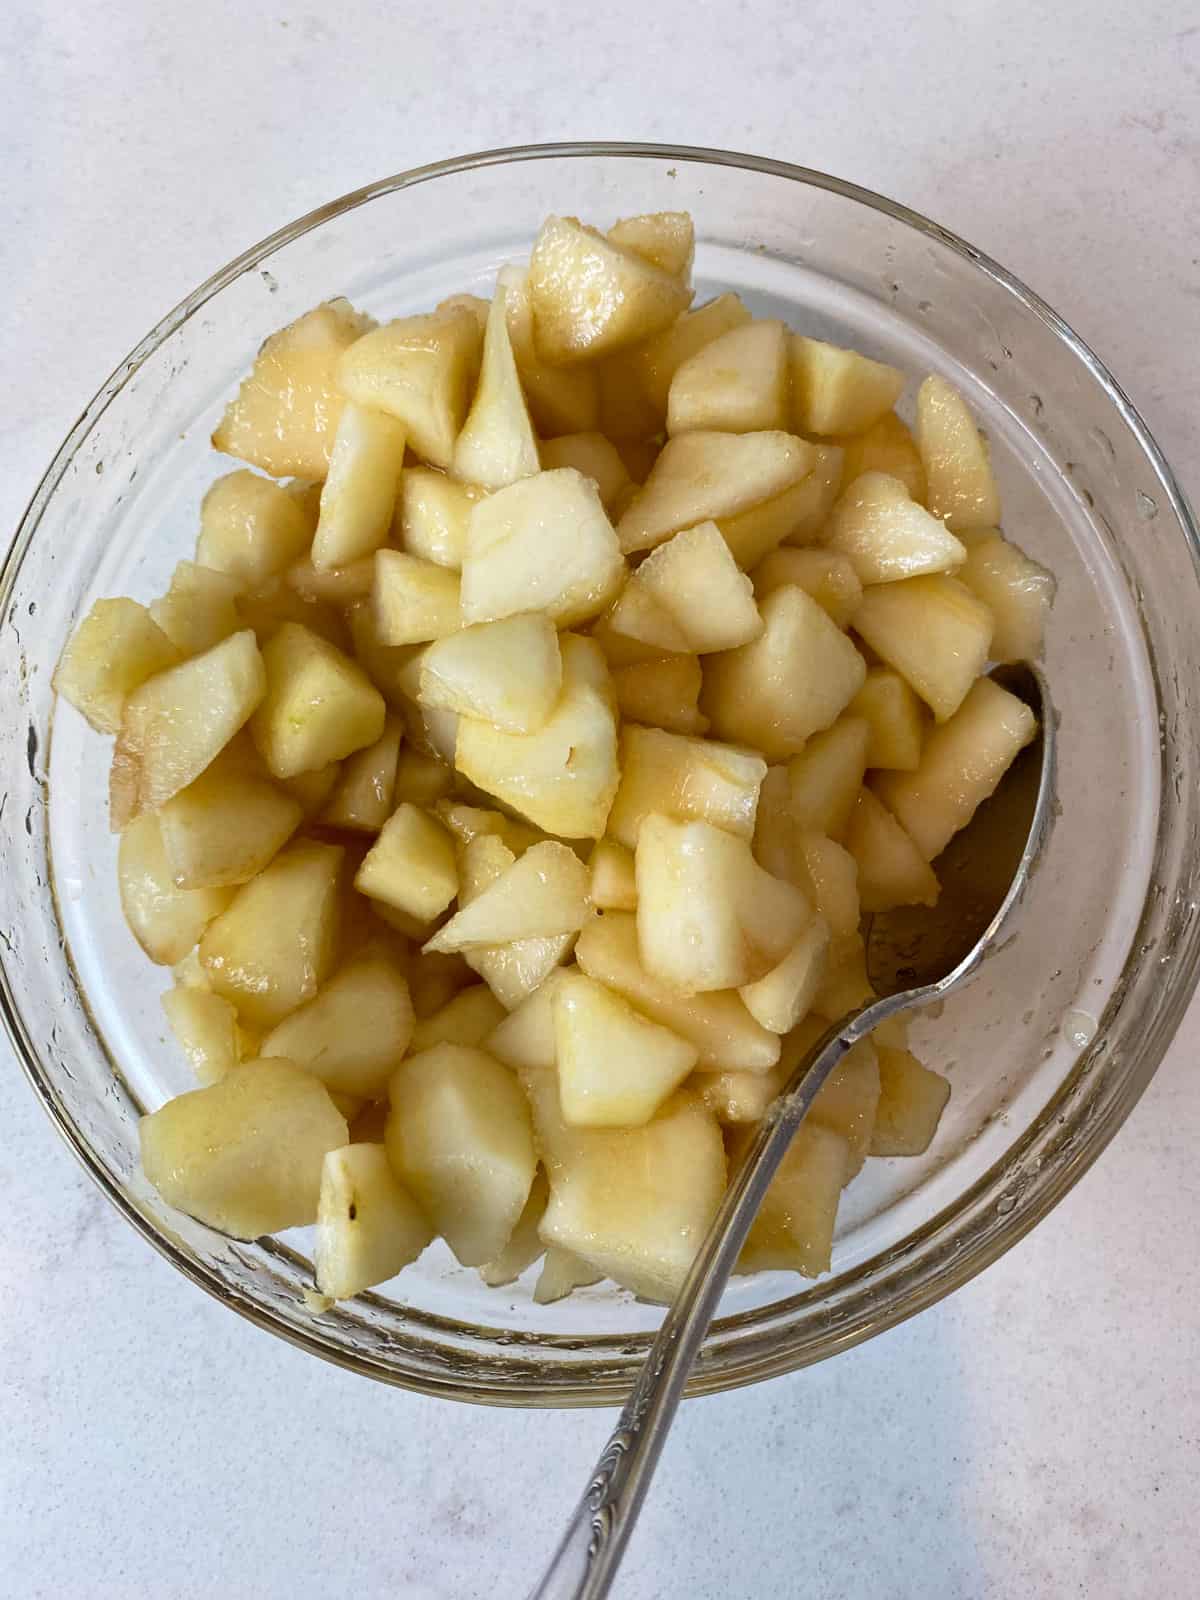 Toss the chopped pears with brown sugar.